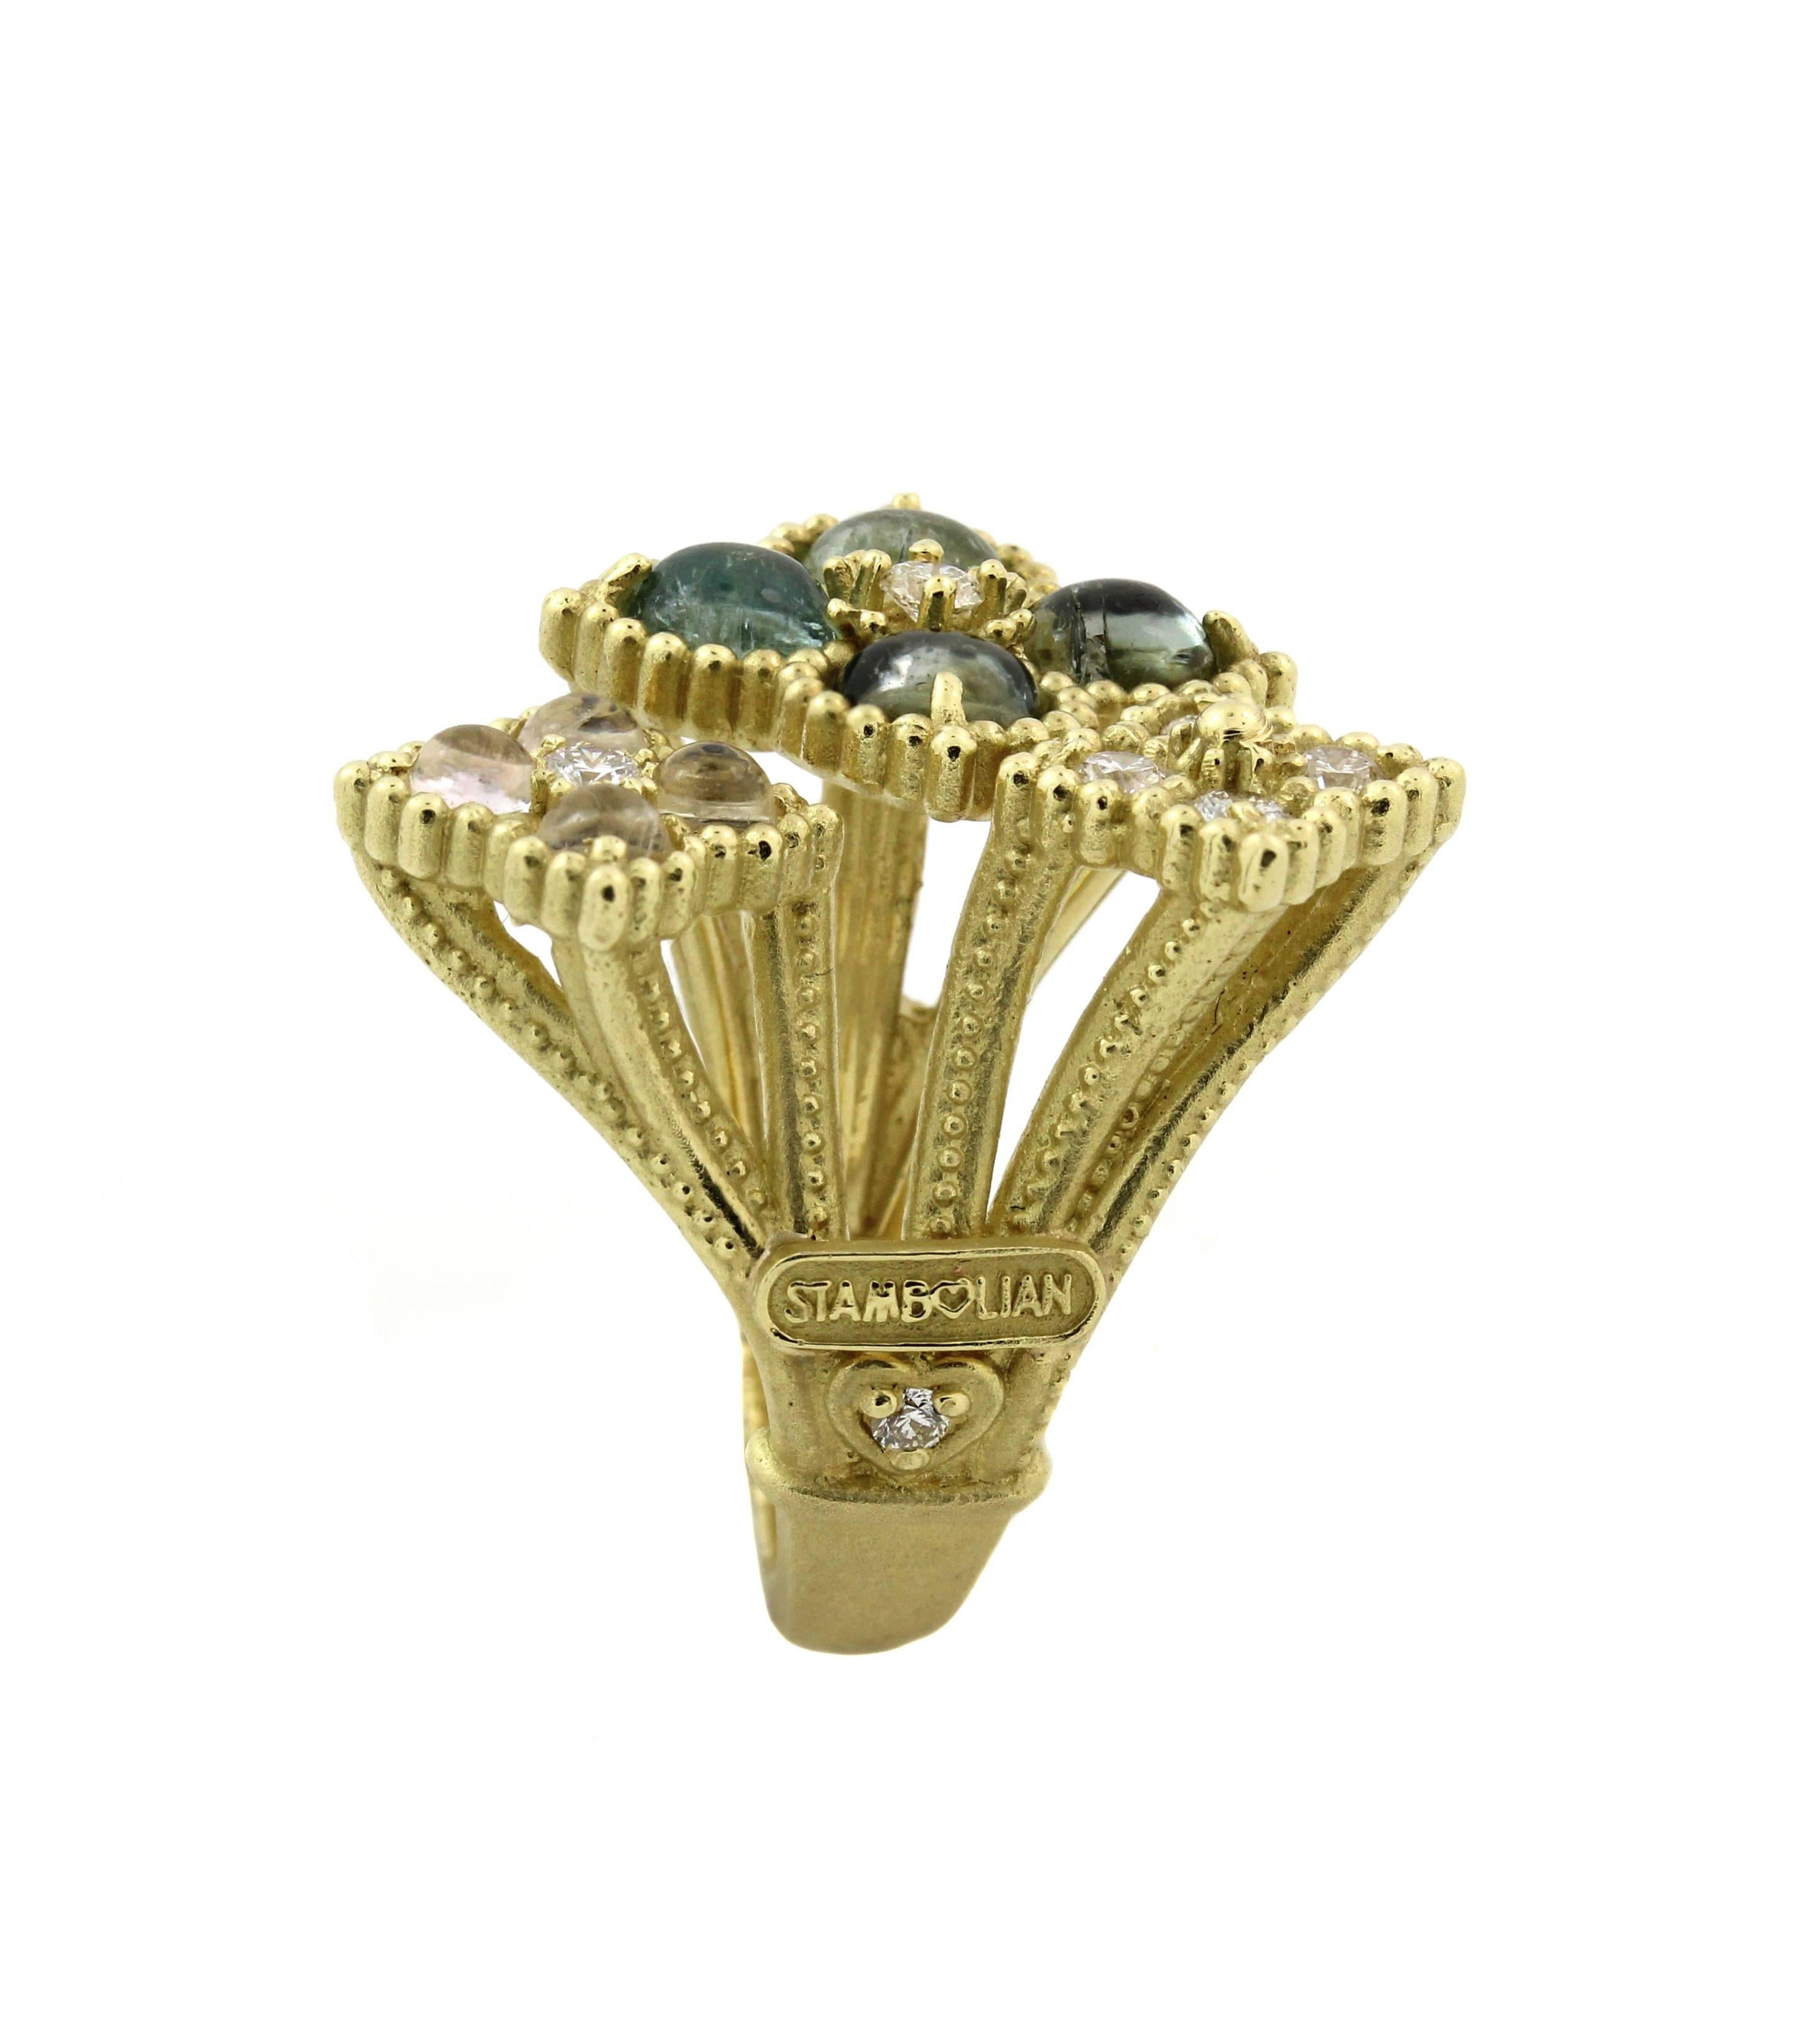 18K Yellow Gold Ring with Tourmalines, Rainbow Moonstones and Diamonds

Apprx. 2.50ct. Tourmalines are set next to eachother on the largest section of ring with diamond center. A slightly smaller section has 4 rainbow moonstones. The third section